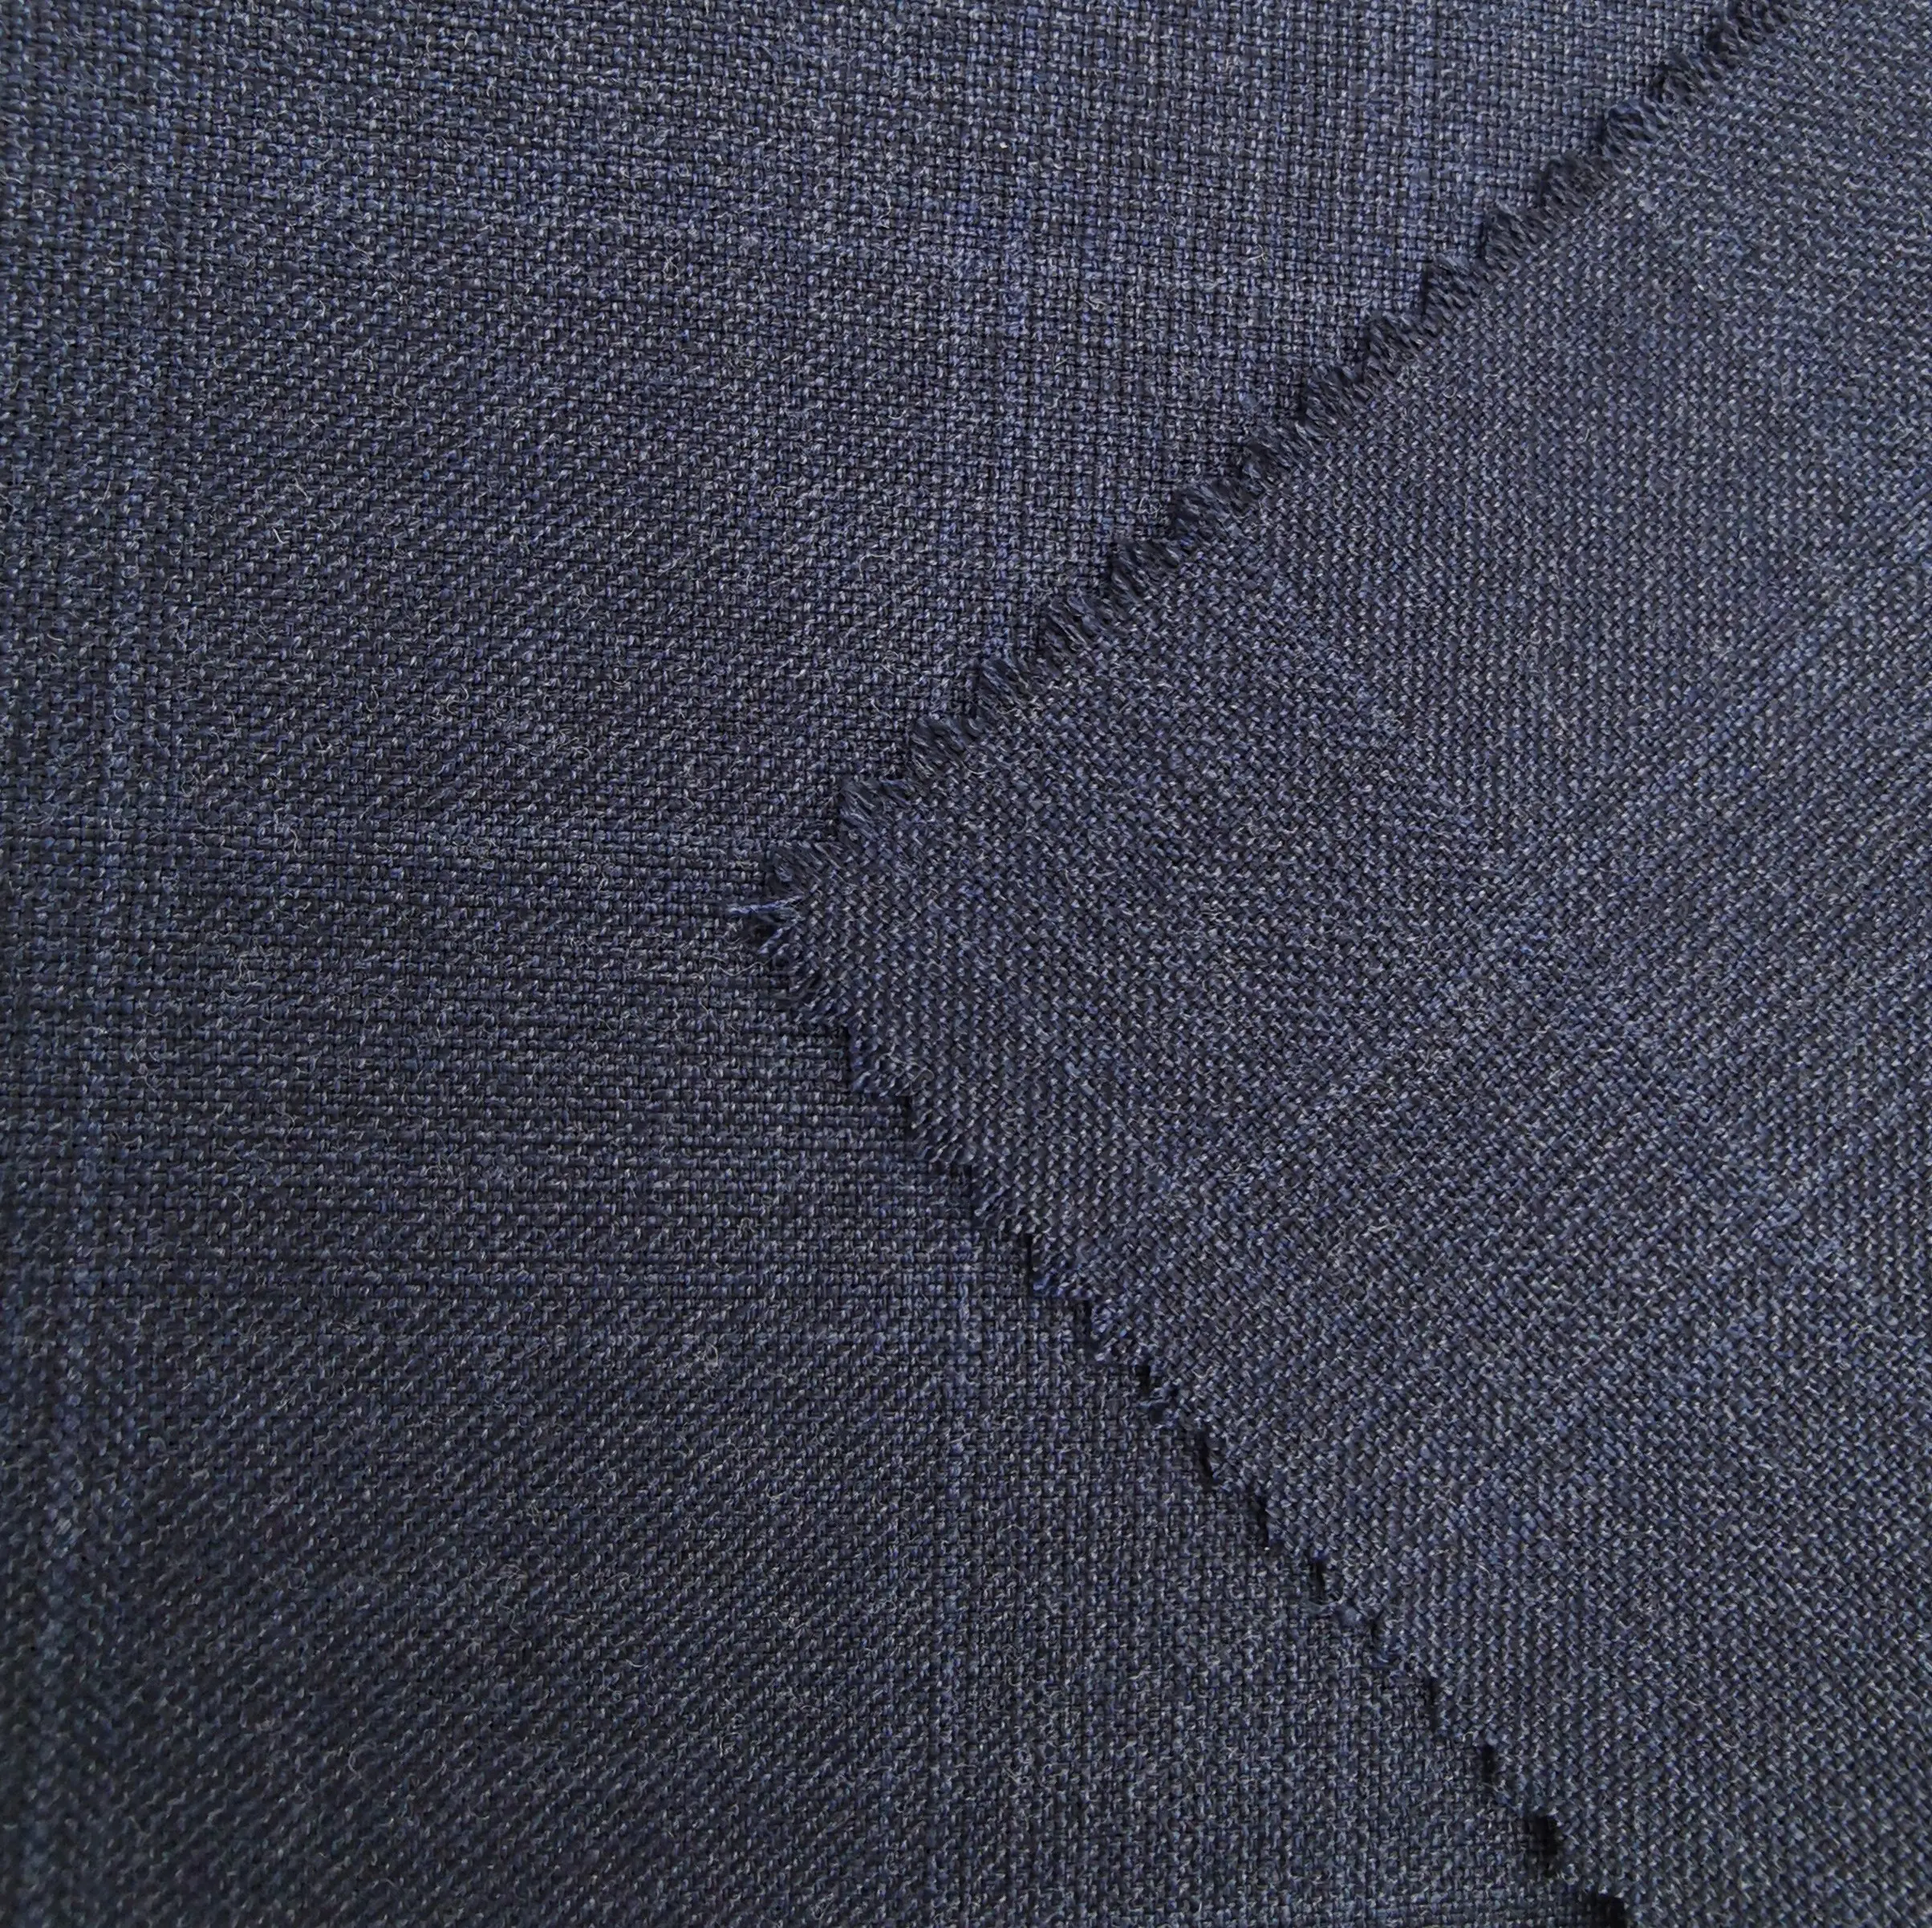 Wool Fabric 235553 Youngor Pure Wool Series Fine Twill Worsted Men Suit Fabrics Formal Wear Cotton Fabric Jogging Suits